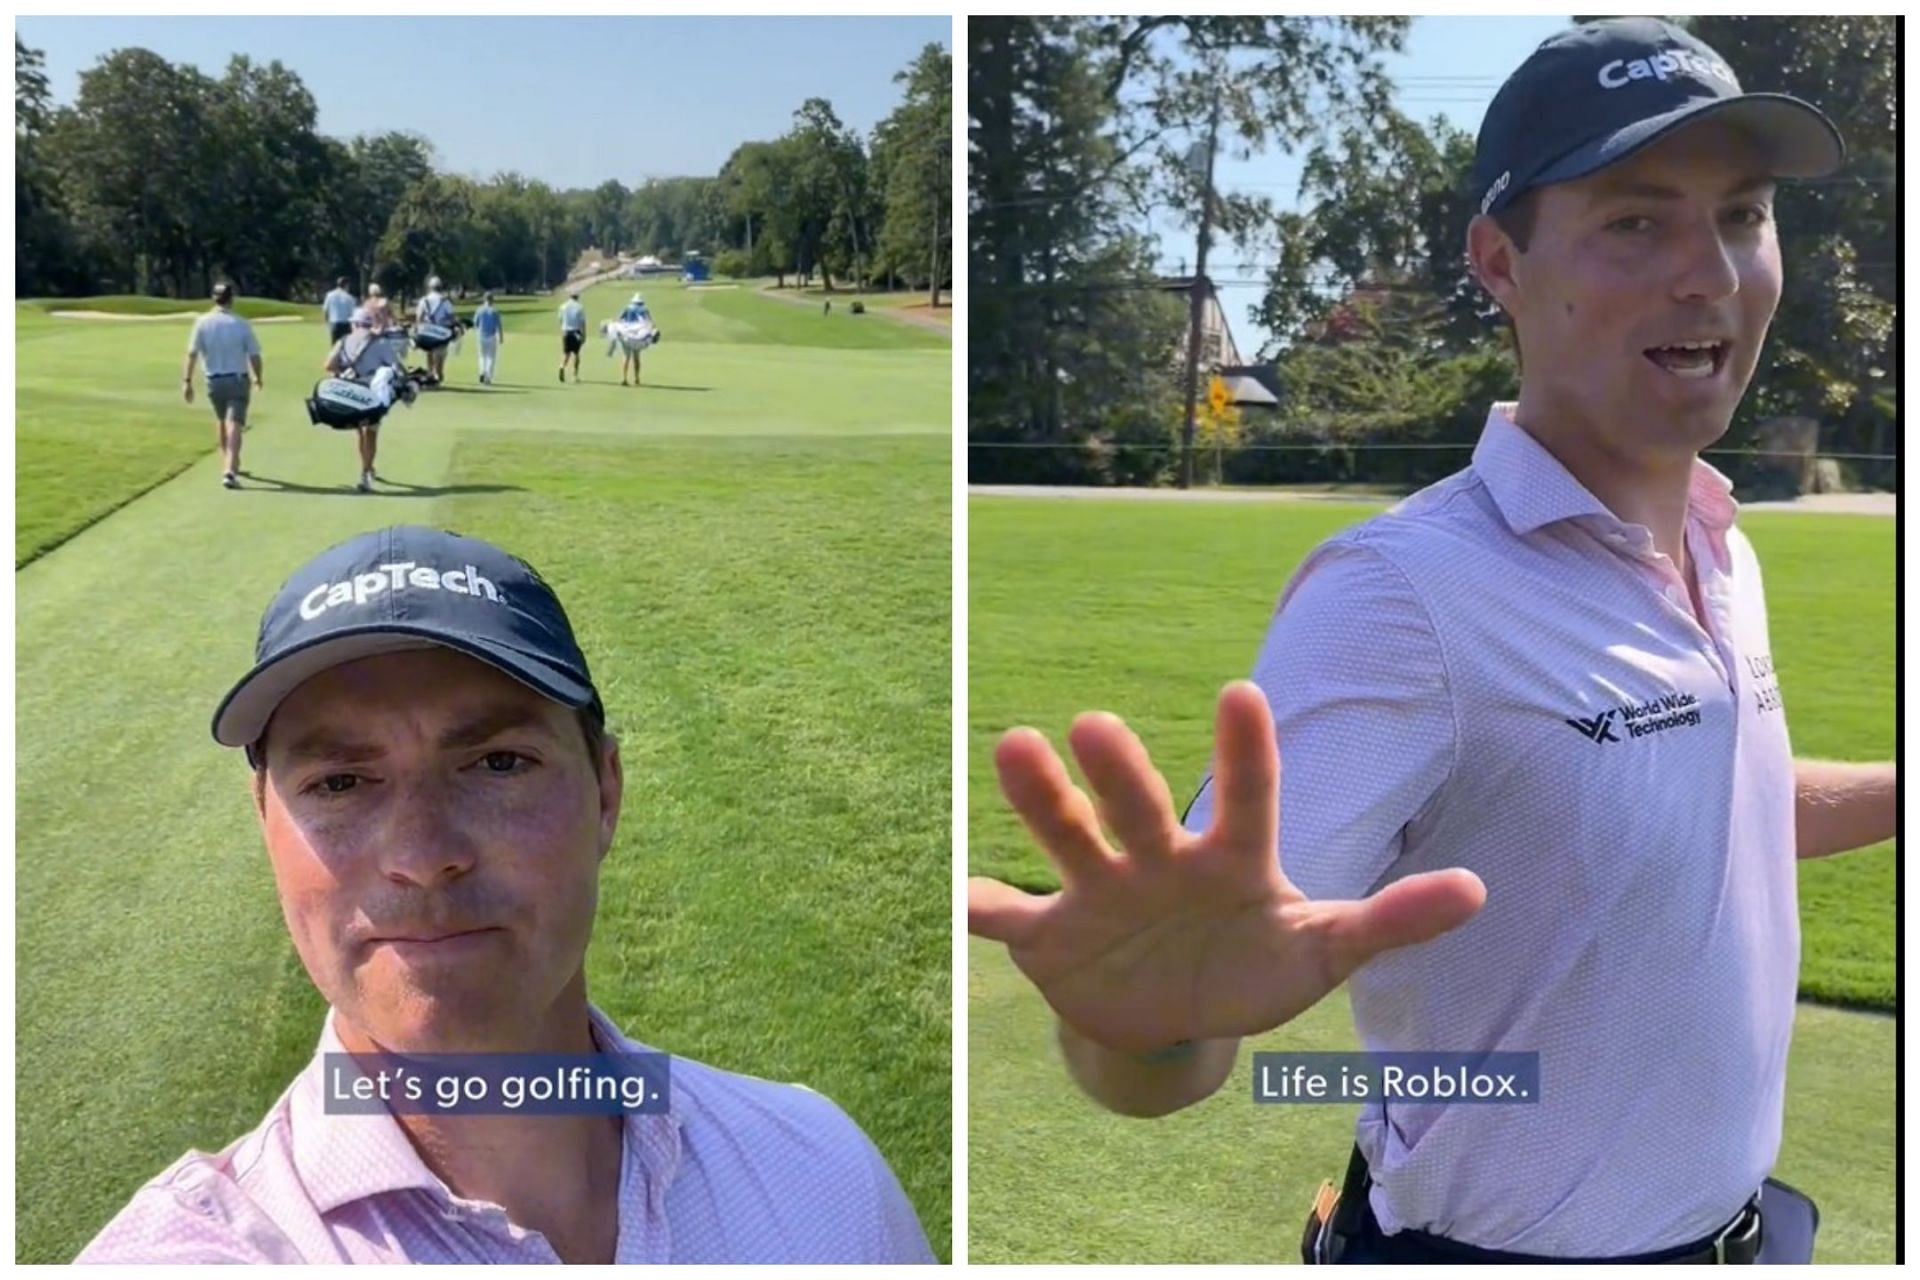 Ben Griffin impersonated Ben Griffin ahead of the Wyndham Championship (Image via Twitter.com/PGATour)